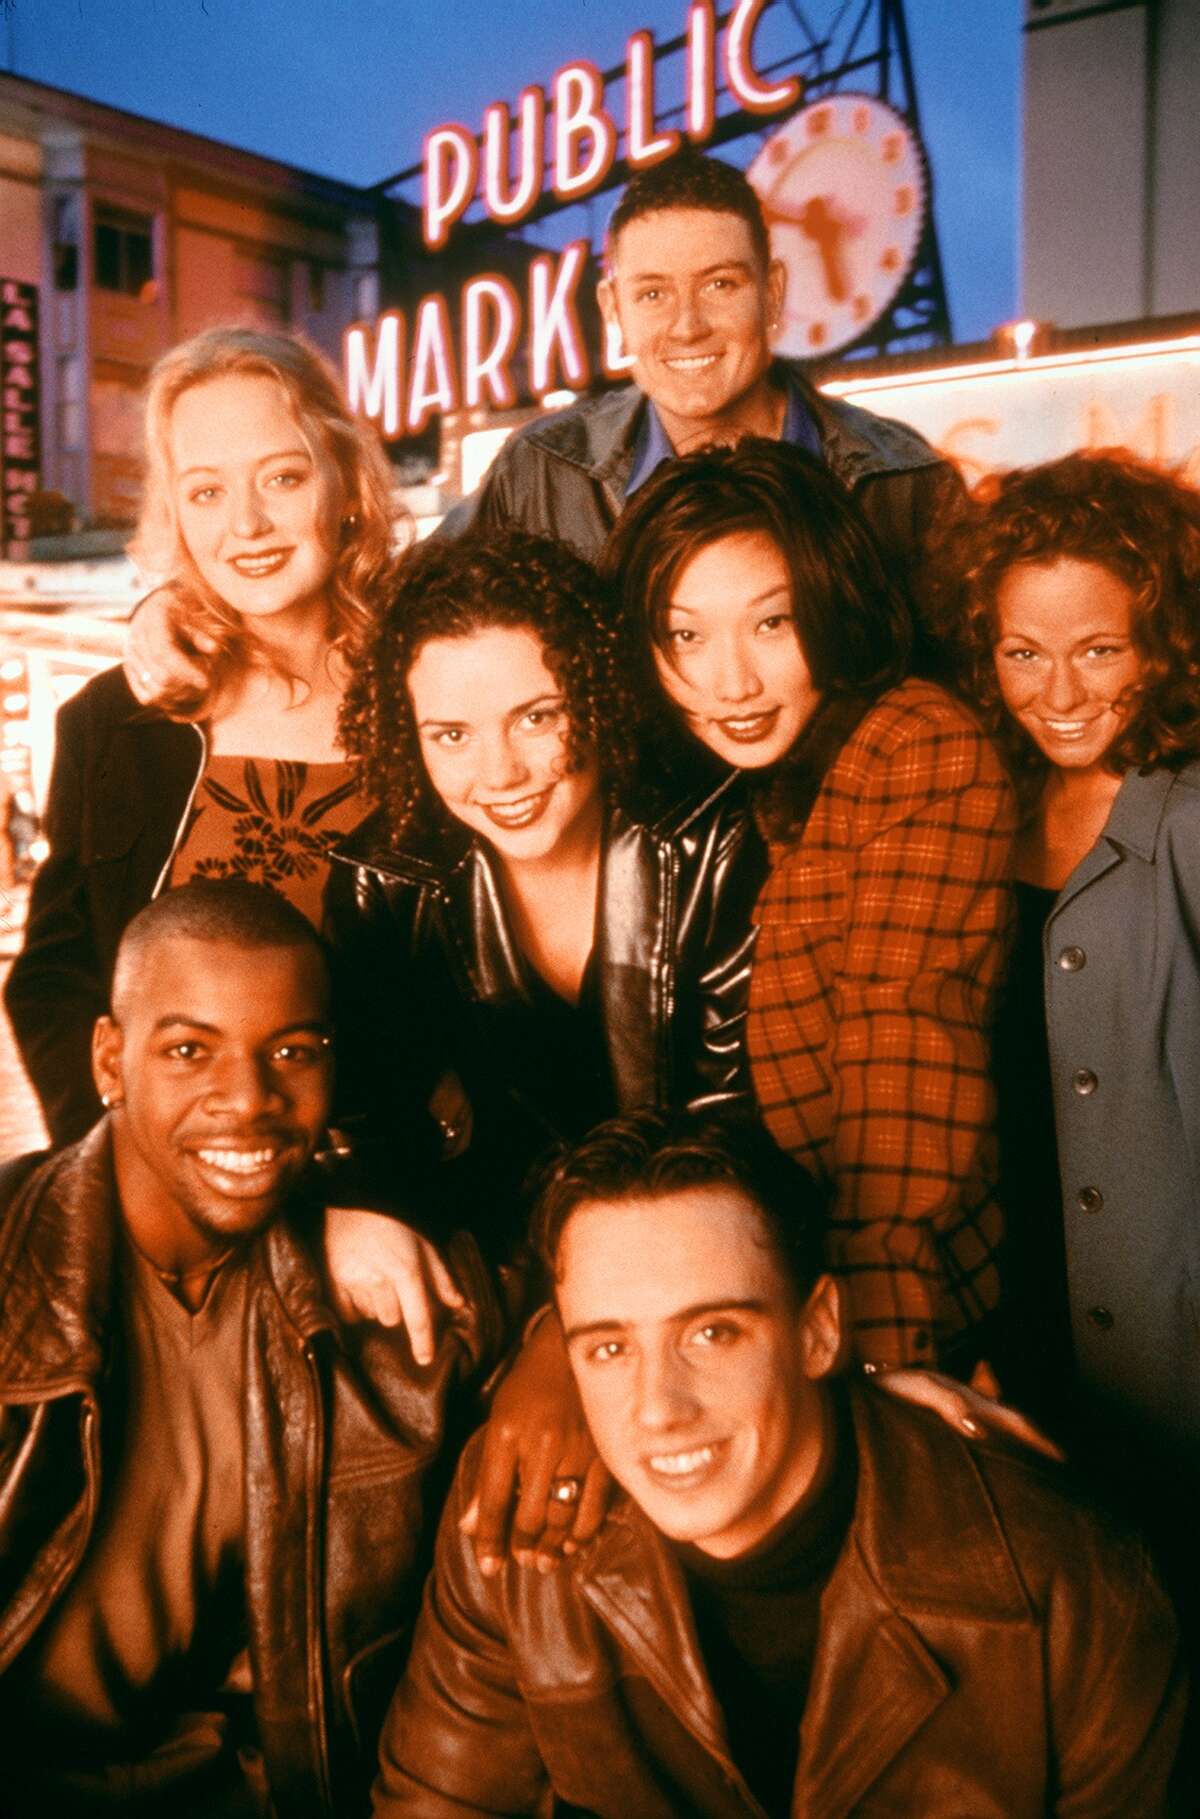 The cast of MTV's "The Real World: Seattle" in 1998: From top, Nathan Blackburn; middle row, from left: Rebecca Lord, Irene McGee, Janet Choi and Lindsay Brien; bottom row: Stephen Willams, left, and David Burns. They lived in a house on Pier 70 that's no longer there. 